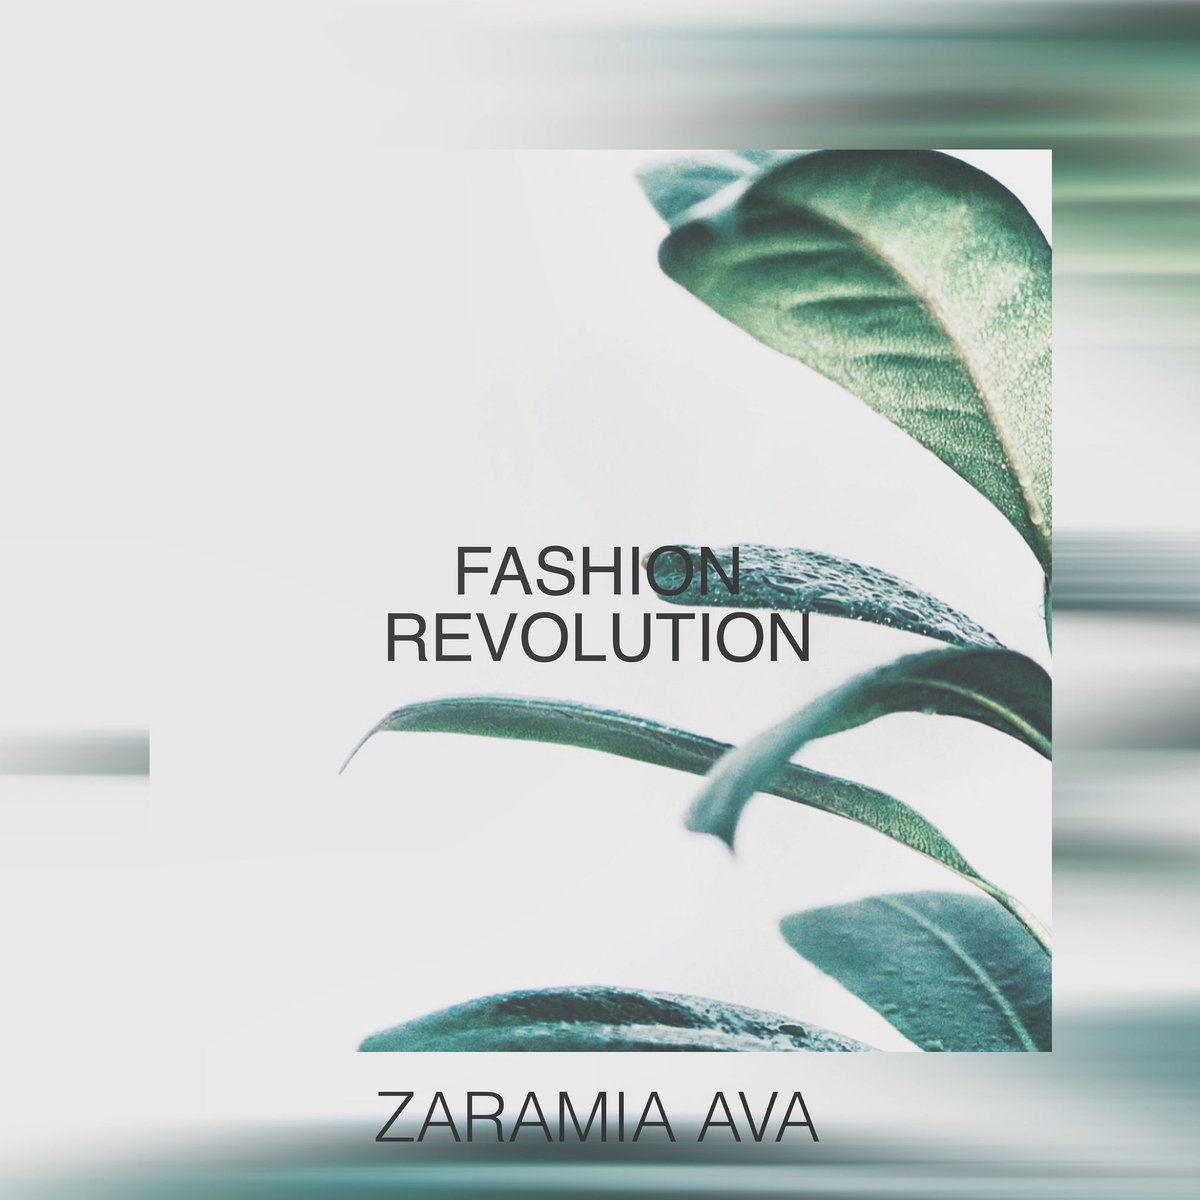 Here are a few more ways to join in with Fashion Revolution Week (starting on 15th April):

Here is our How to Stand up to Fast Fashion blog for this month!

zaramiaava.com/how-to-guides/…

Image from Unsplash

#standuptofastfashion #fastfashion #blog #howtoguide #resources #fashionblog